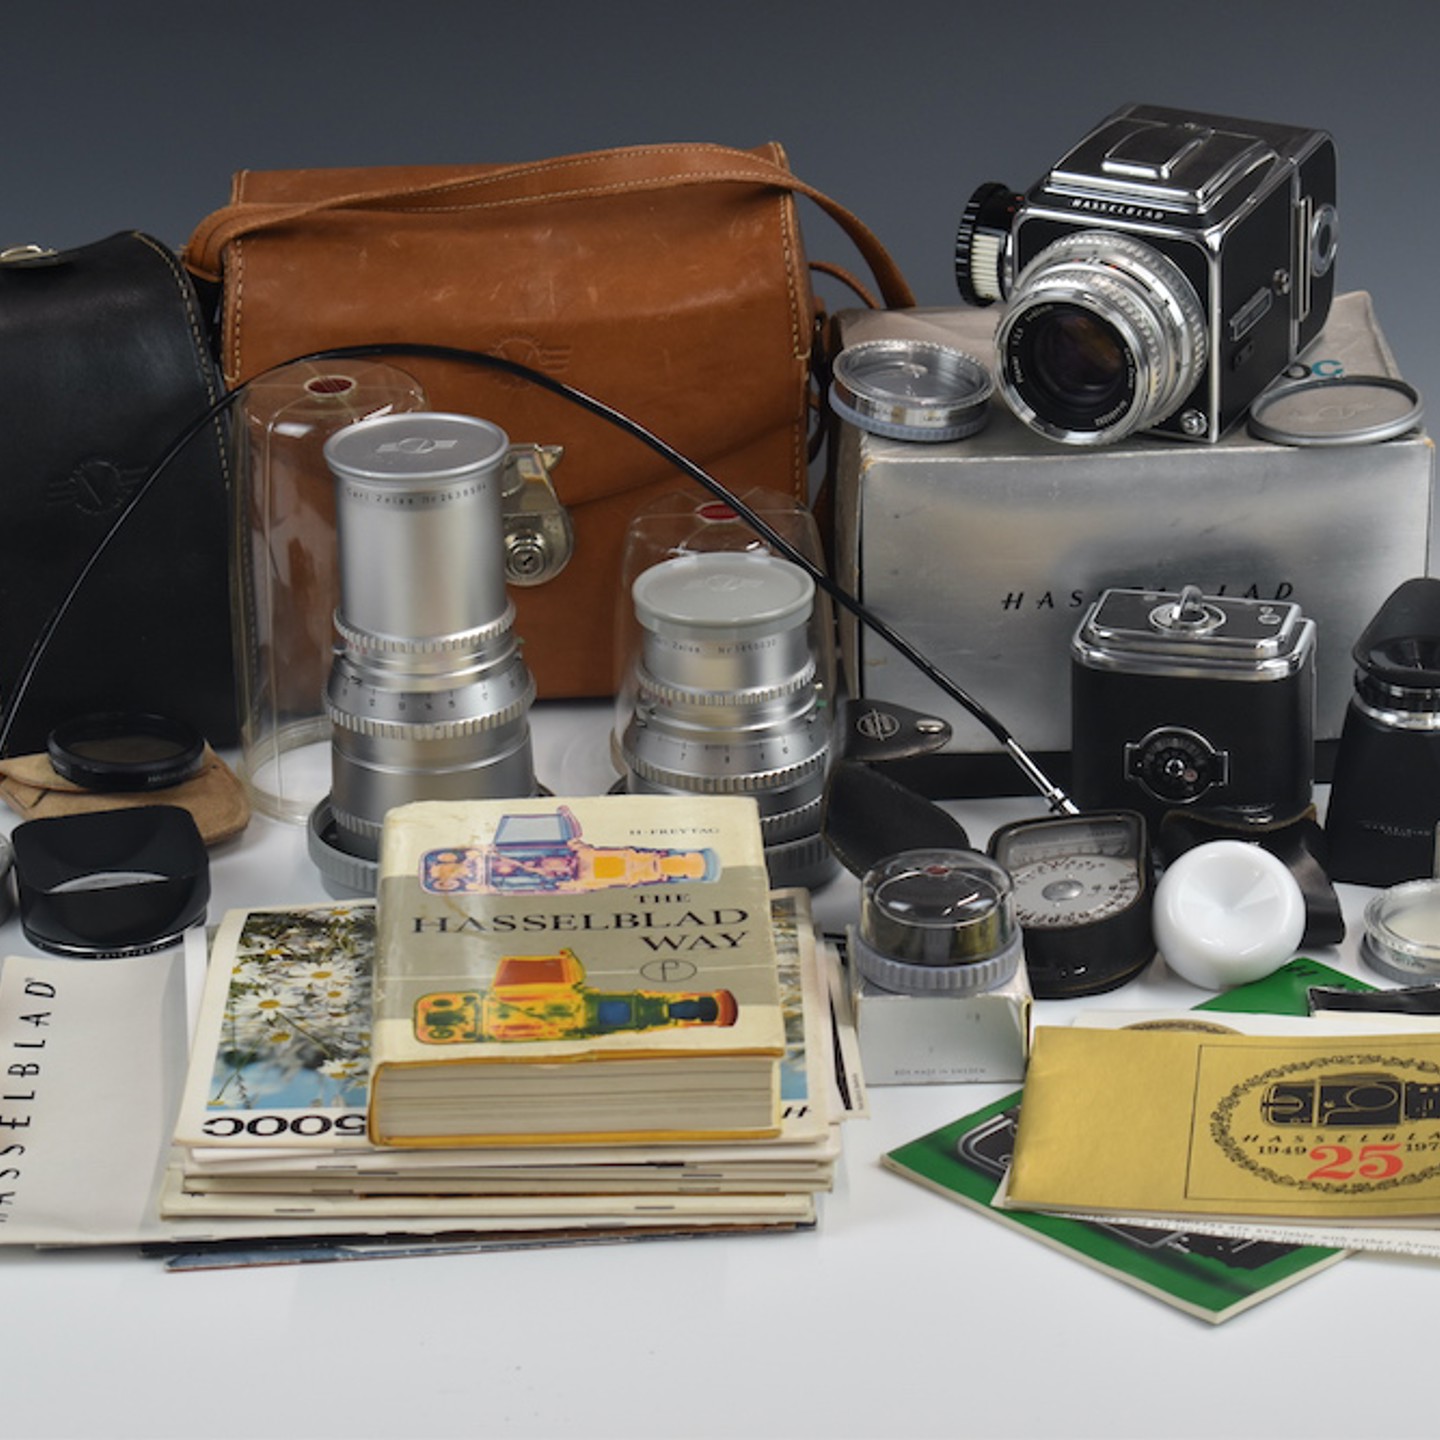 Hasselblad 500C Camera Outfit Comprising Body Sold For £1,200